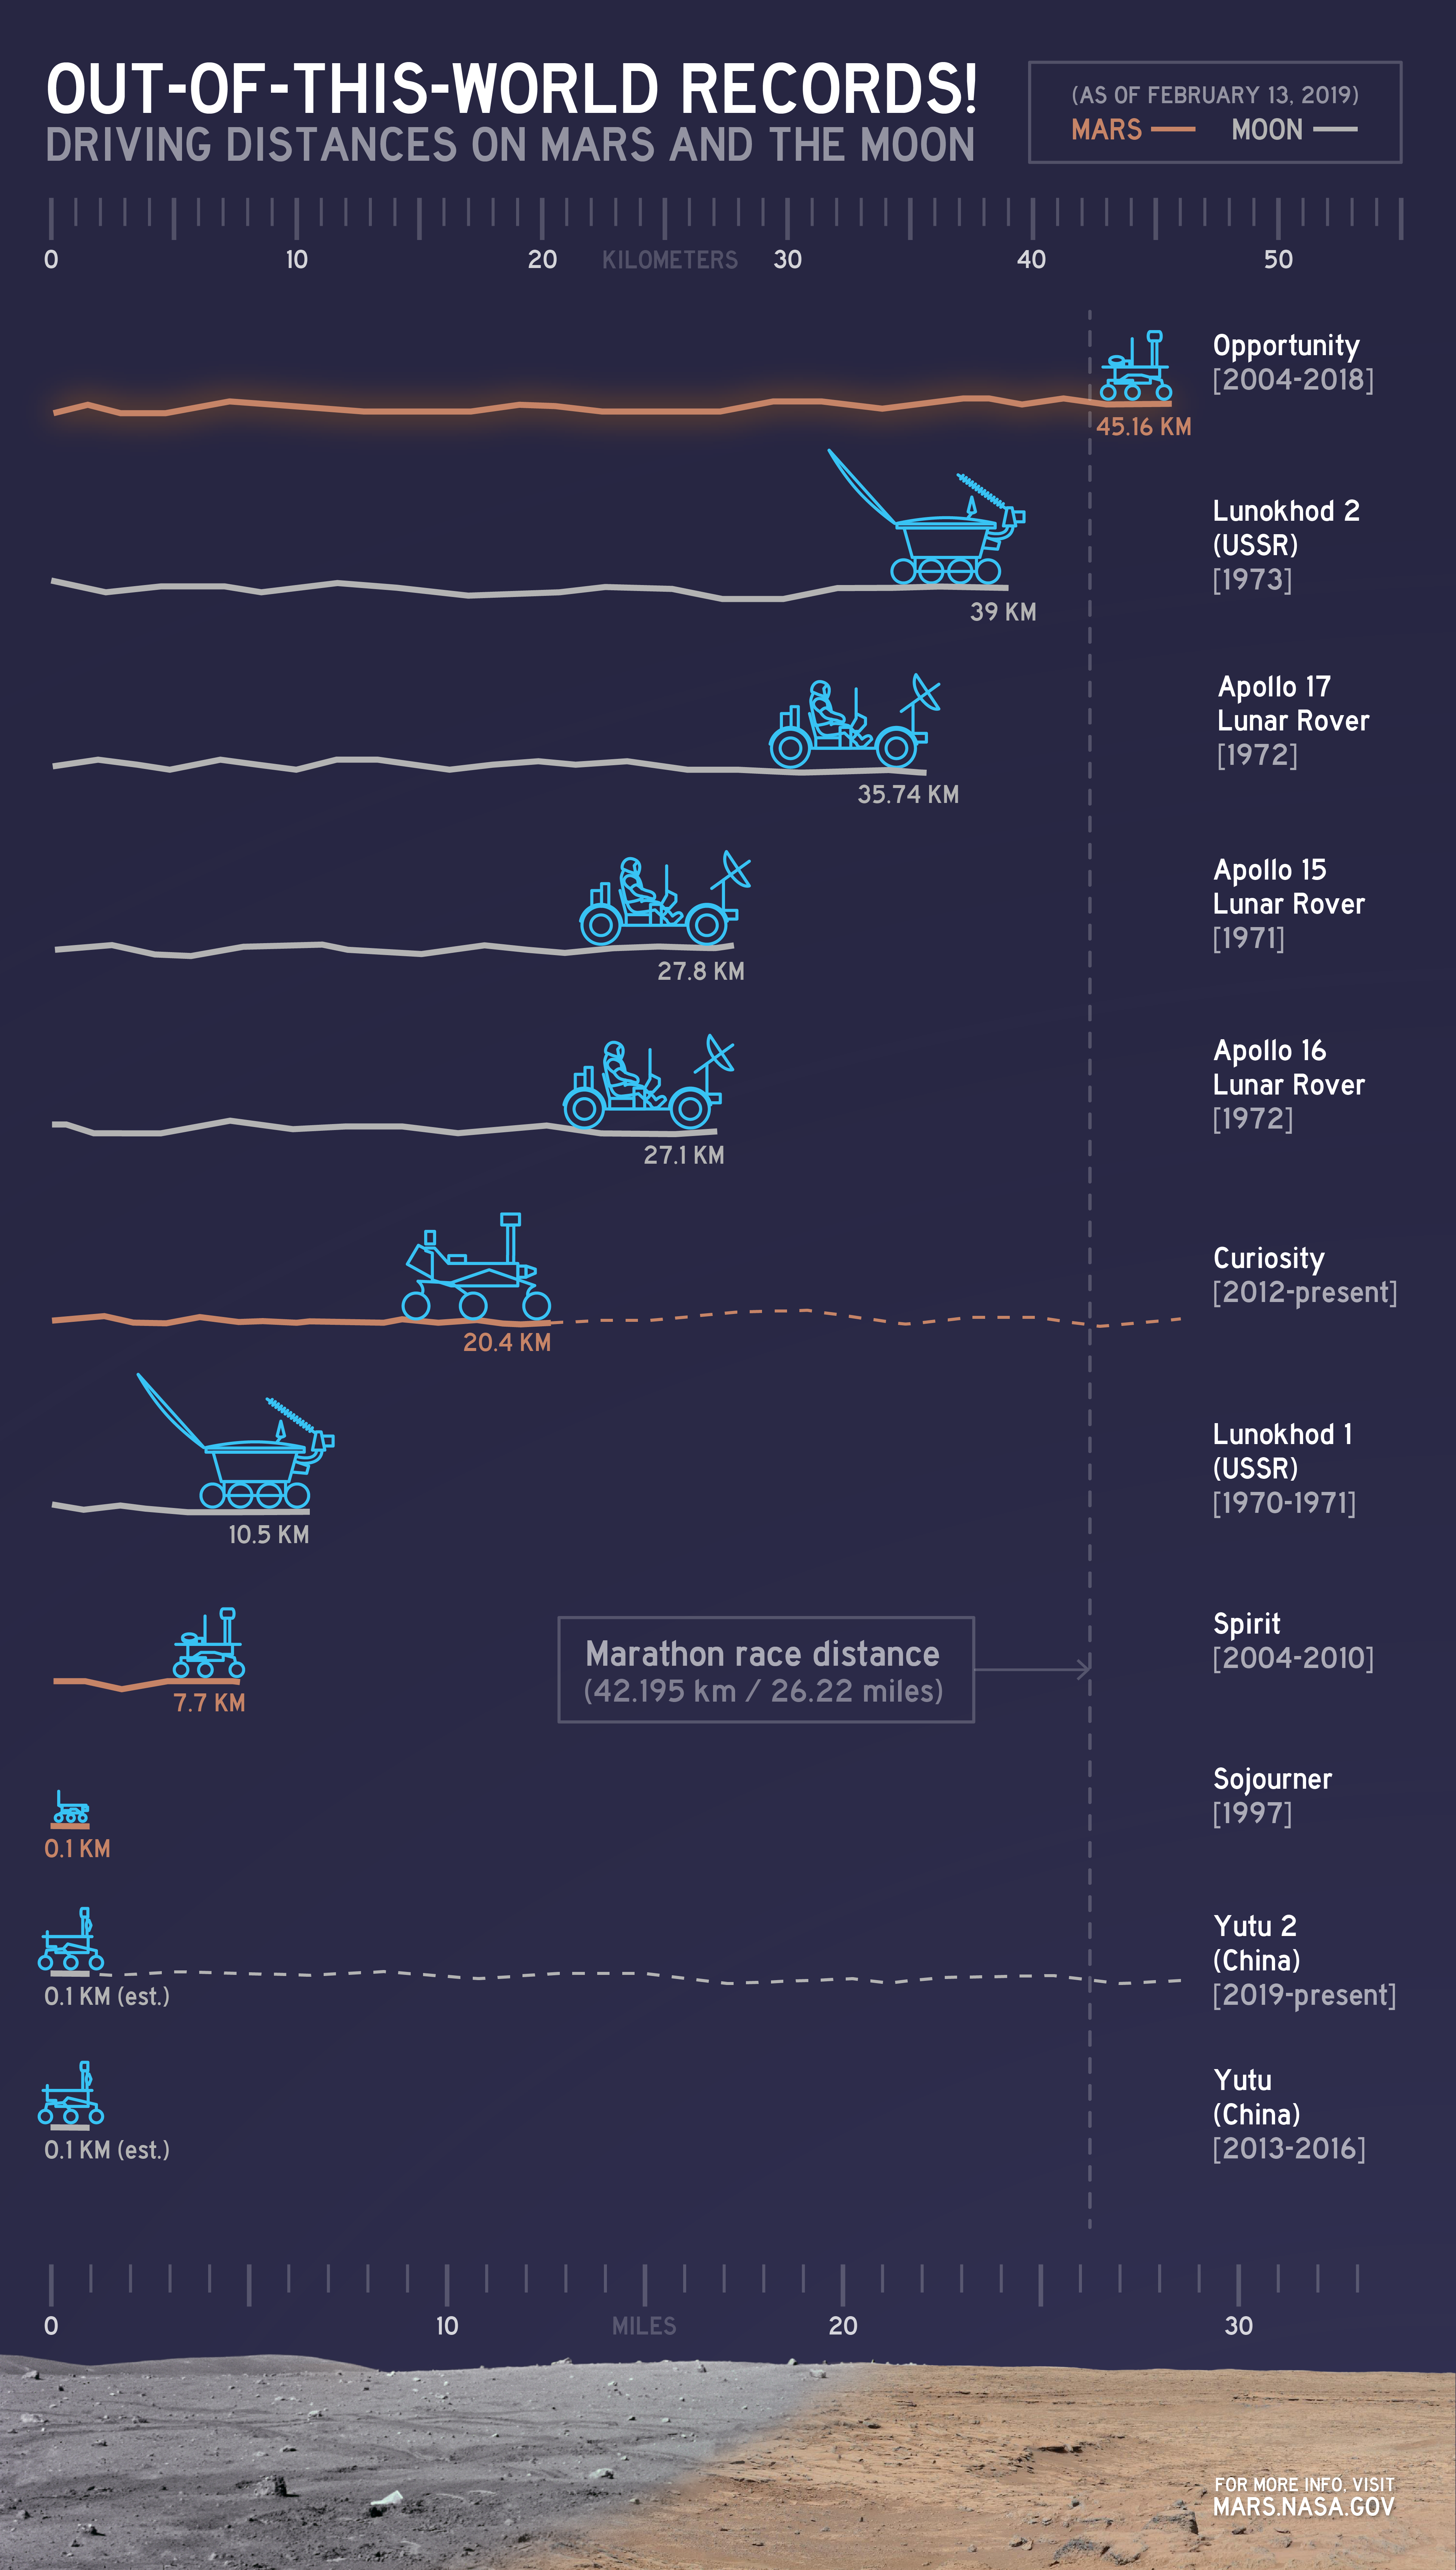 This illustration shows that Opportunity has driven farther than any other historic rovers.